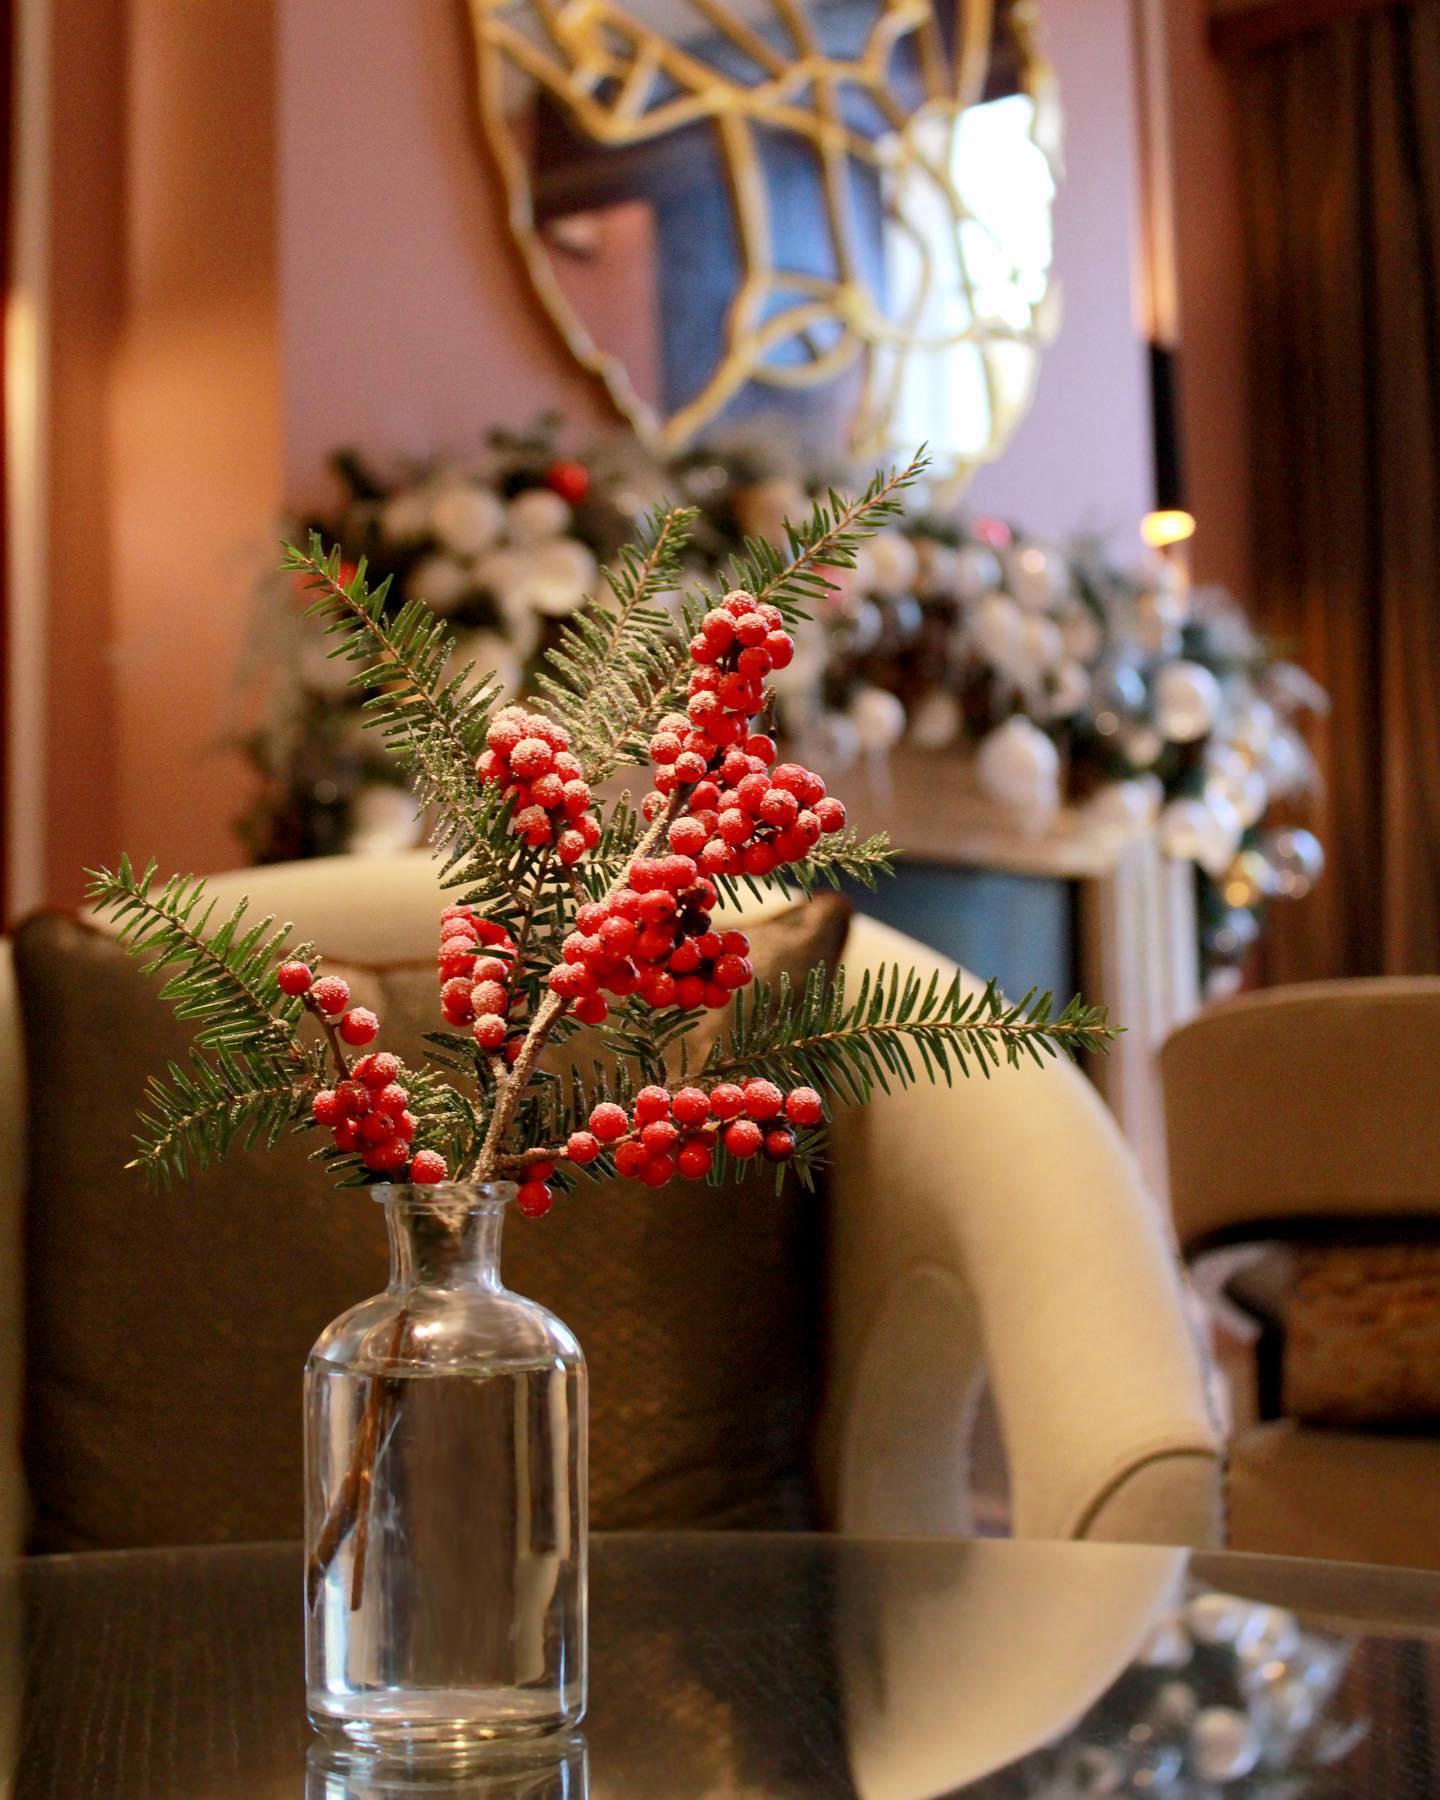 The Biltmore Mayfair - Celebrate the festive season with us in the heart of Mayfair